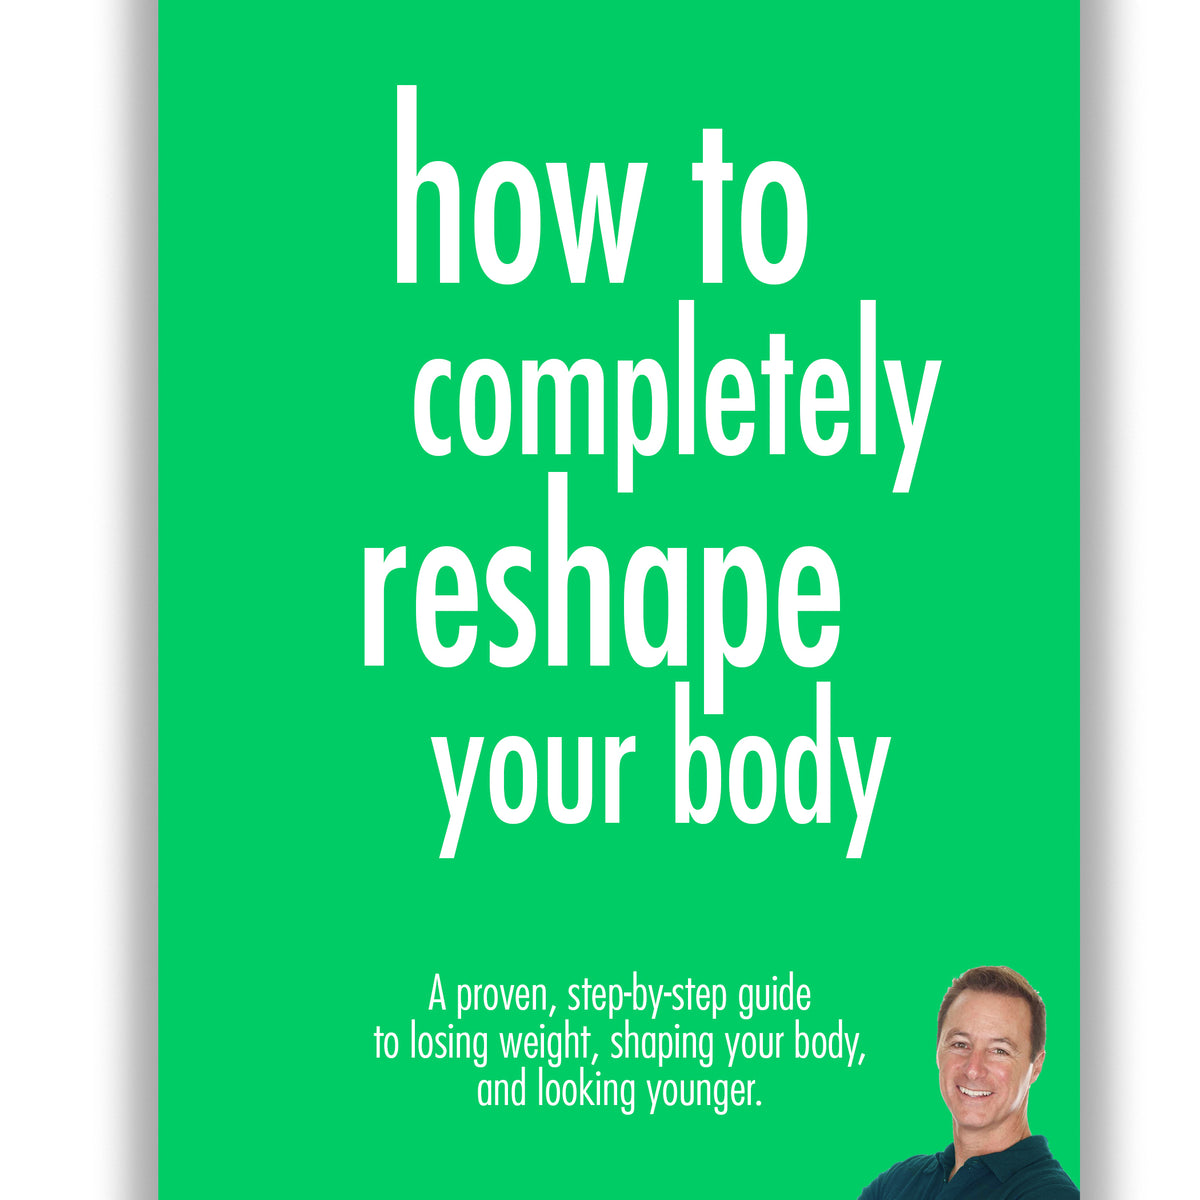 How to Completely Reshape Your Body eBook - Health Direct